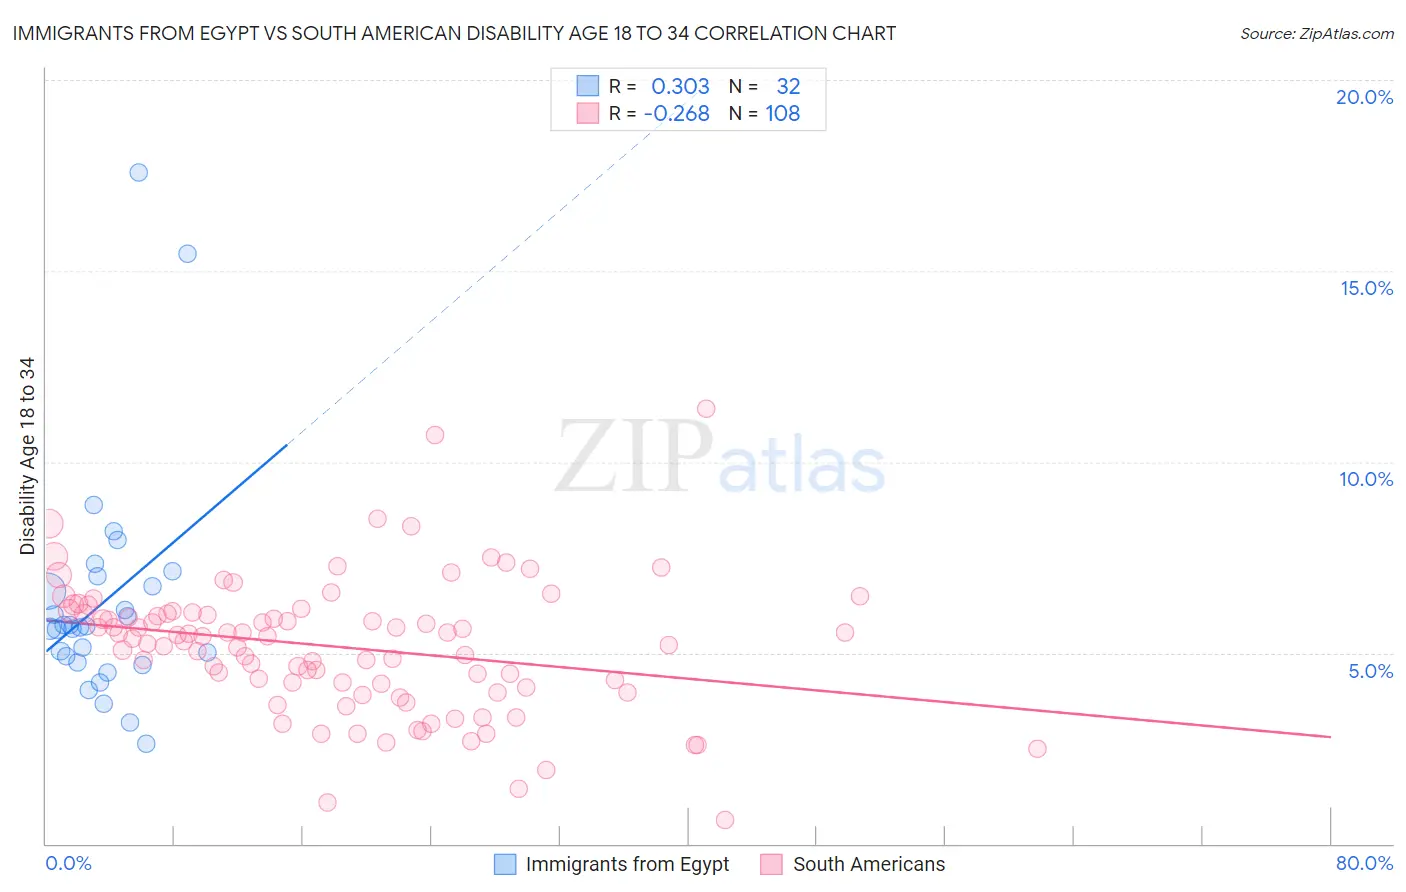 Immigrants from Egypt vs South American Disability Age 18 to 34